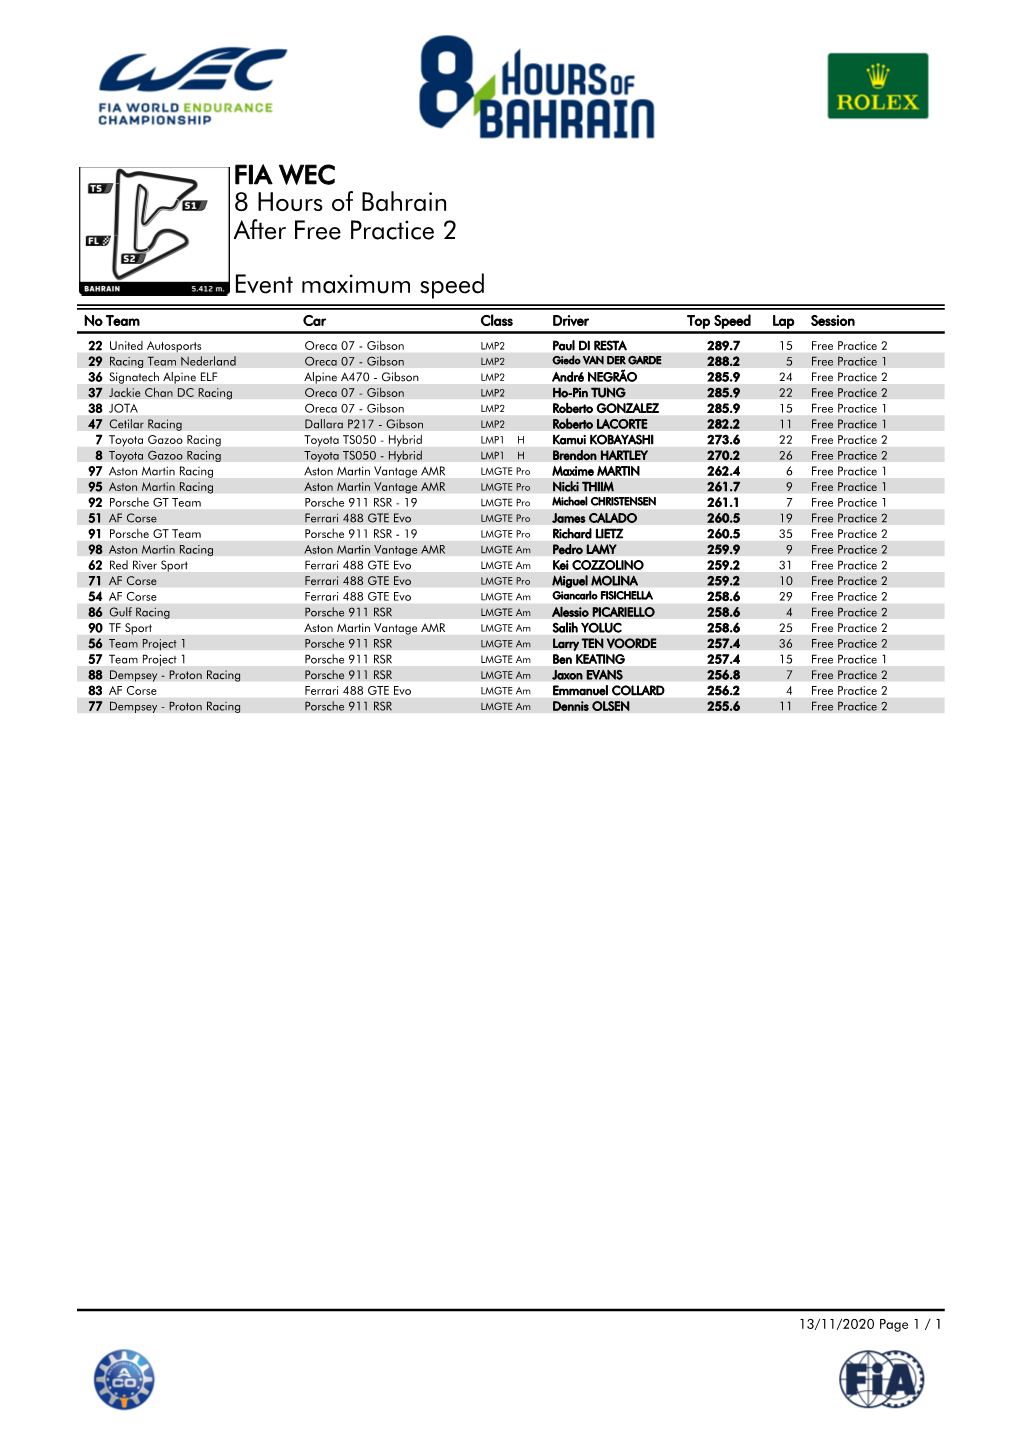 Event Maximum Speed Free Practice 2 8 Hours of Bahrain FIA WEC After